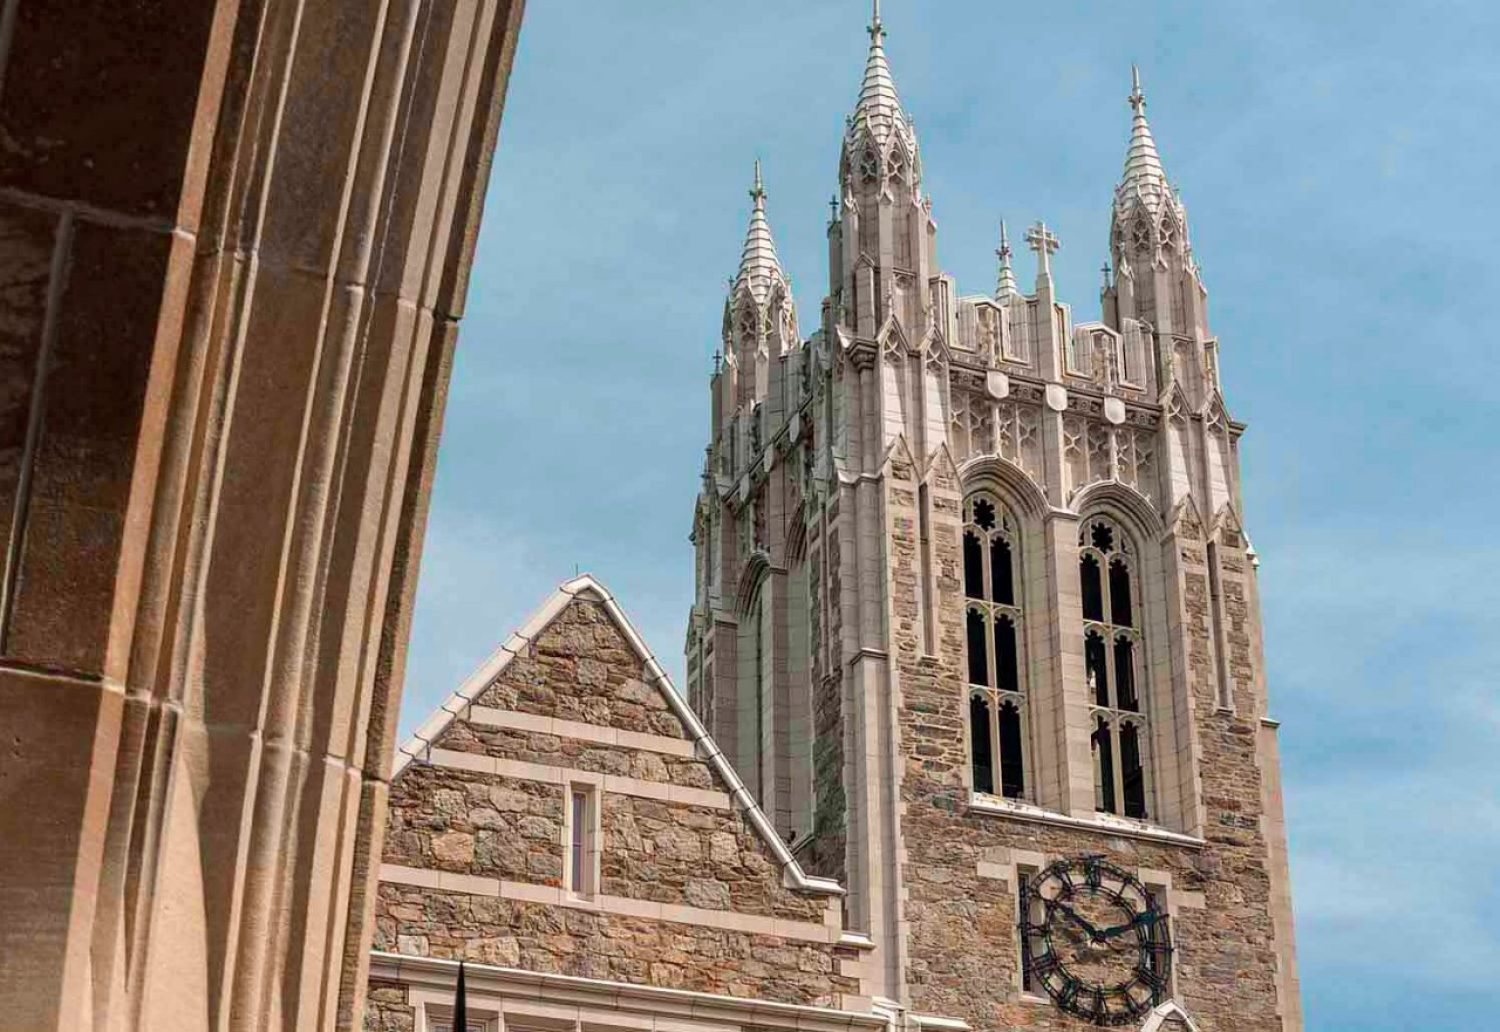 Gasson tower spires